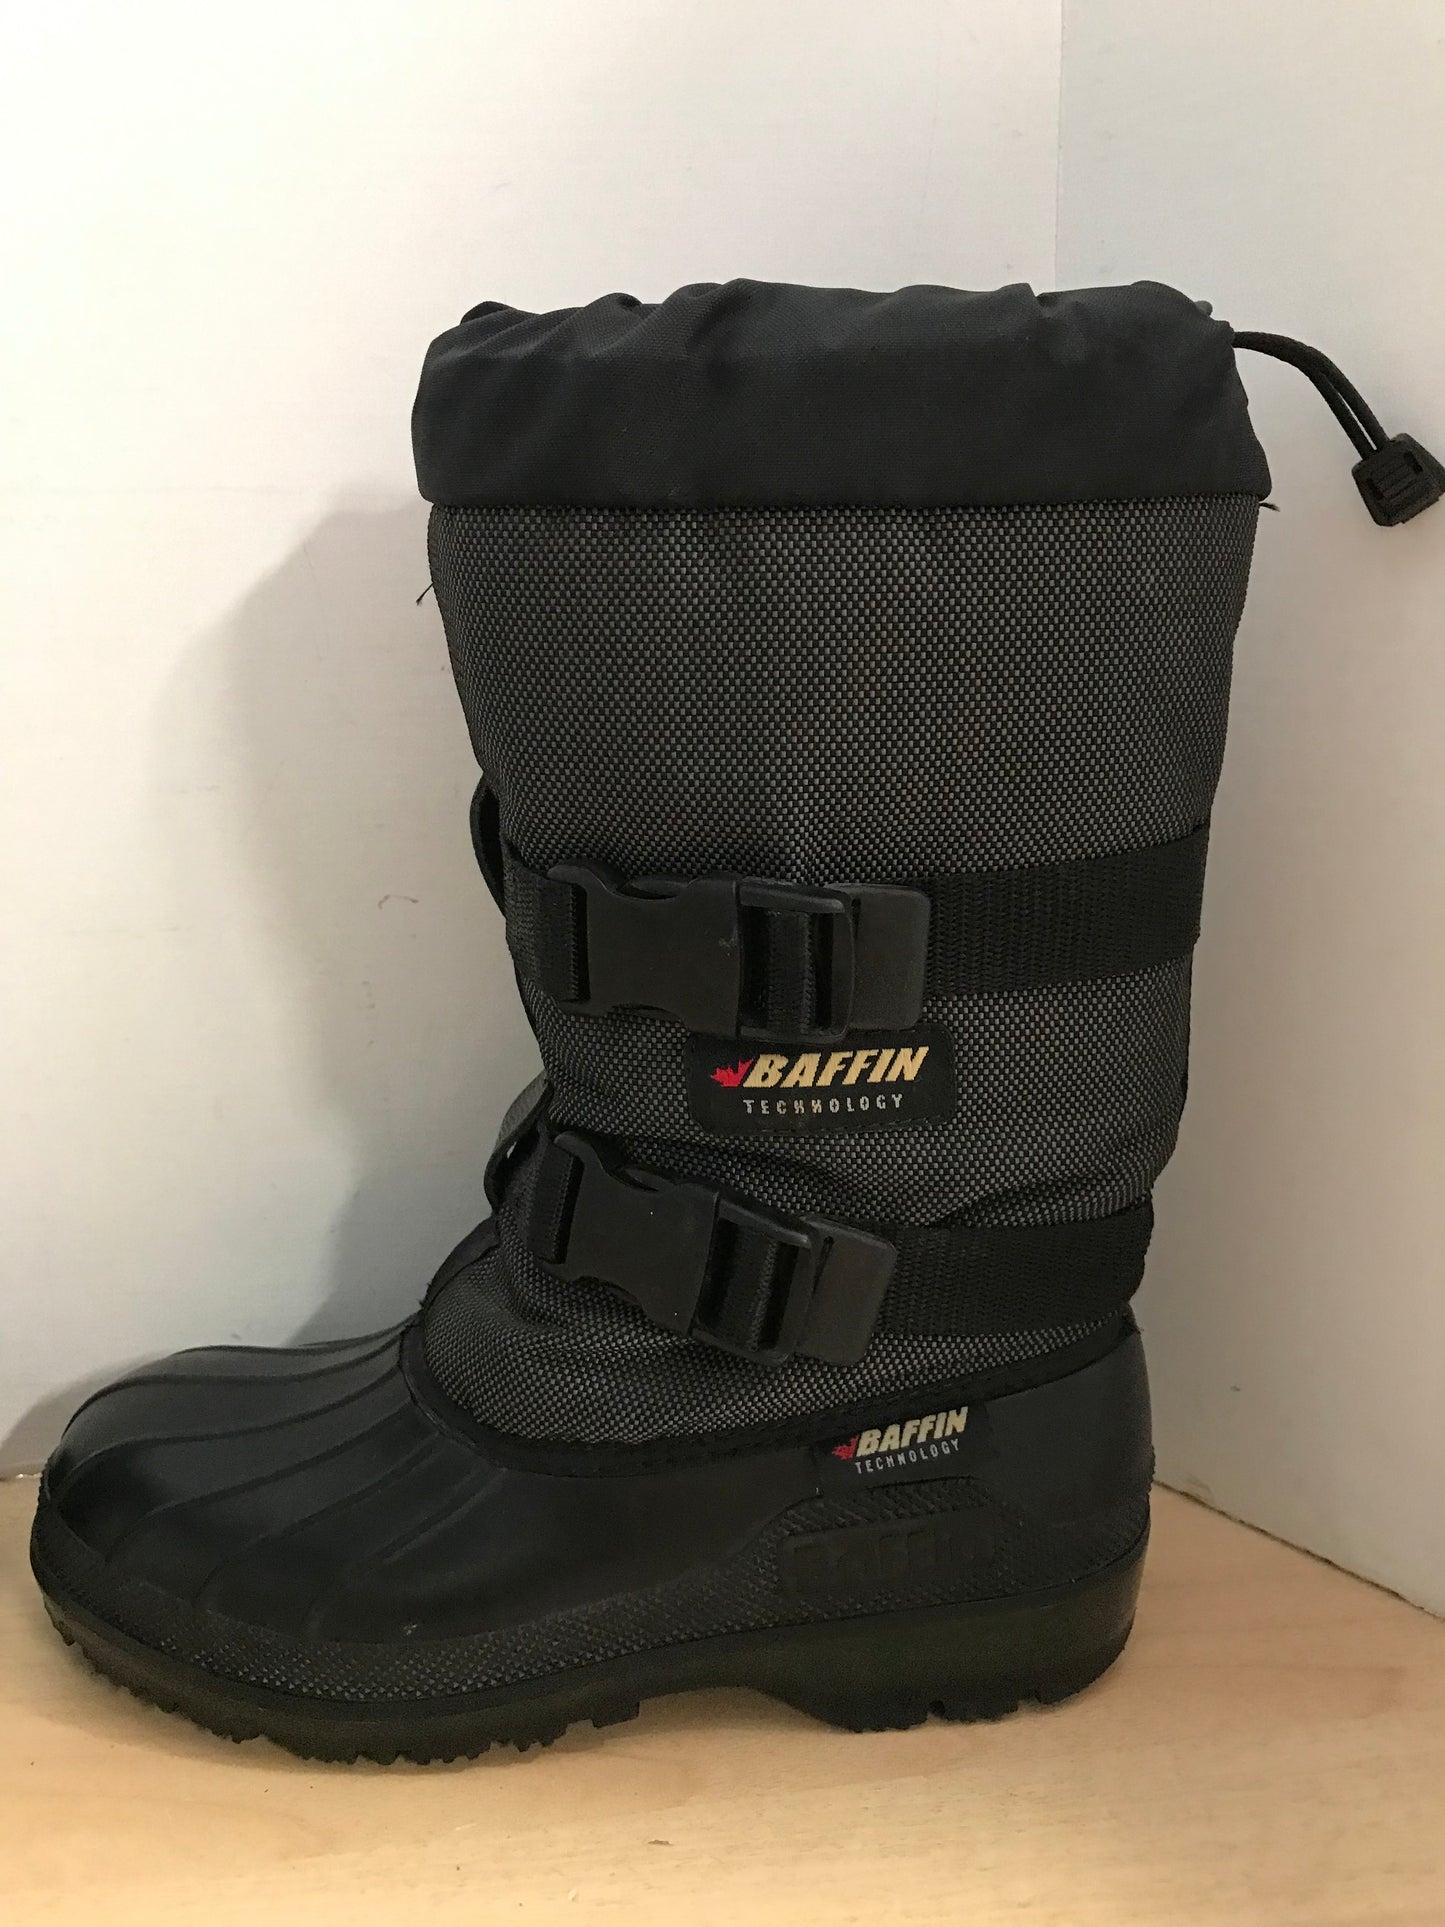 Winter Boots Ladies Size 7 Baffin With Liner Black Excellent